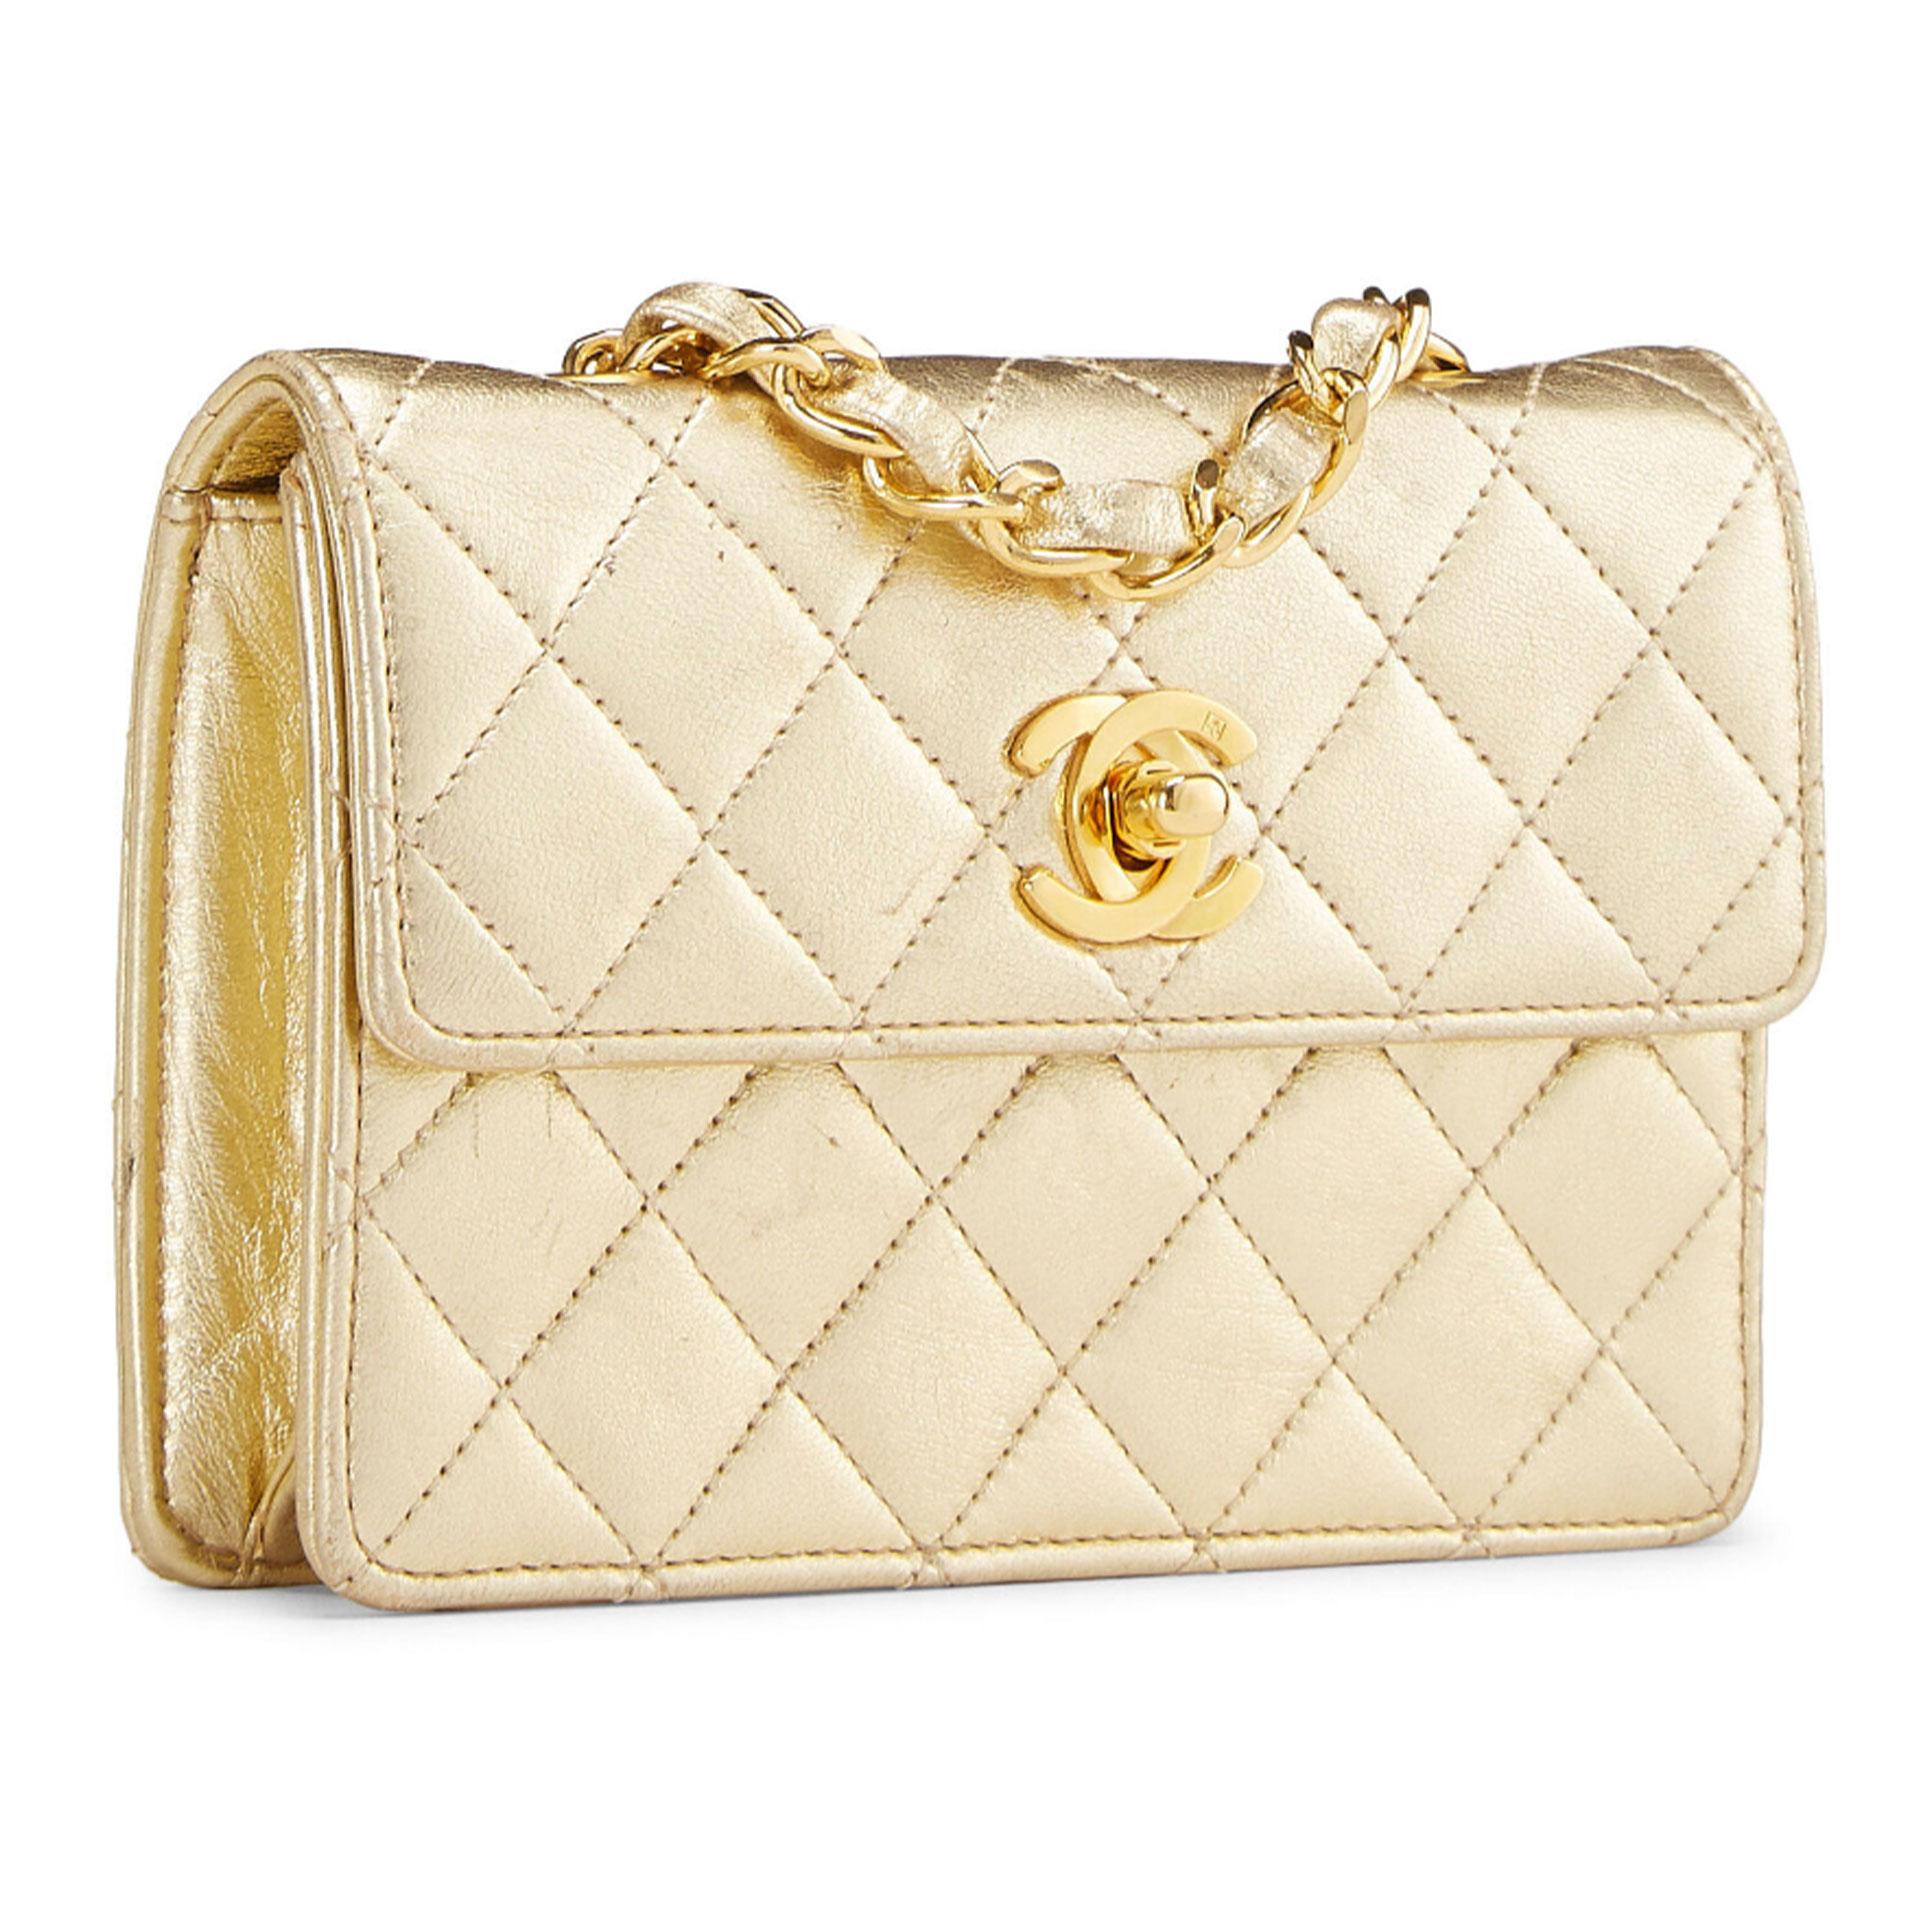 Chanel Vintage 80's Micro Mini Metallic Gold Quilted Lambskin Flap Bag

Chain-link And Leather Strap
CC Turnlock Closure
Lambskin Leather
Leather Lining
Gold Hardware

Made in France